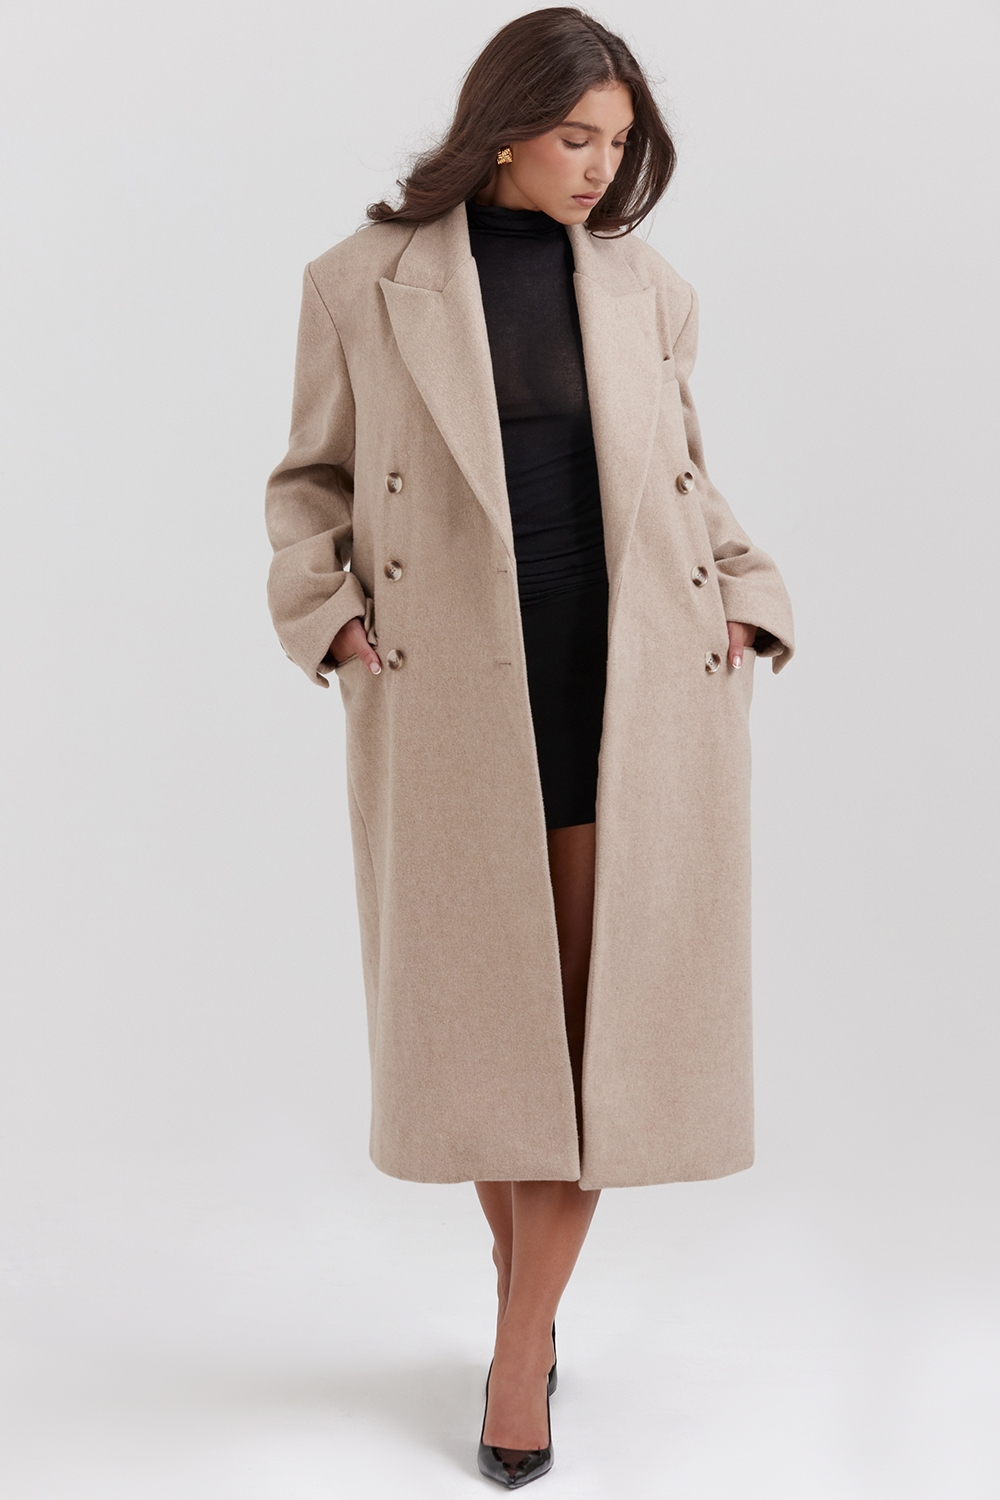 Carter, Oatmeal Double Breasted Coat - SALE